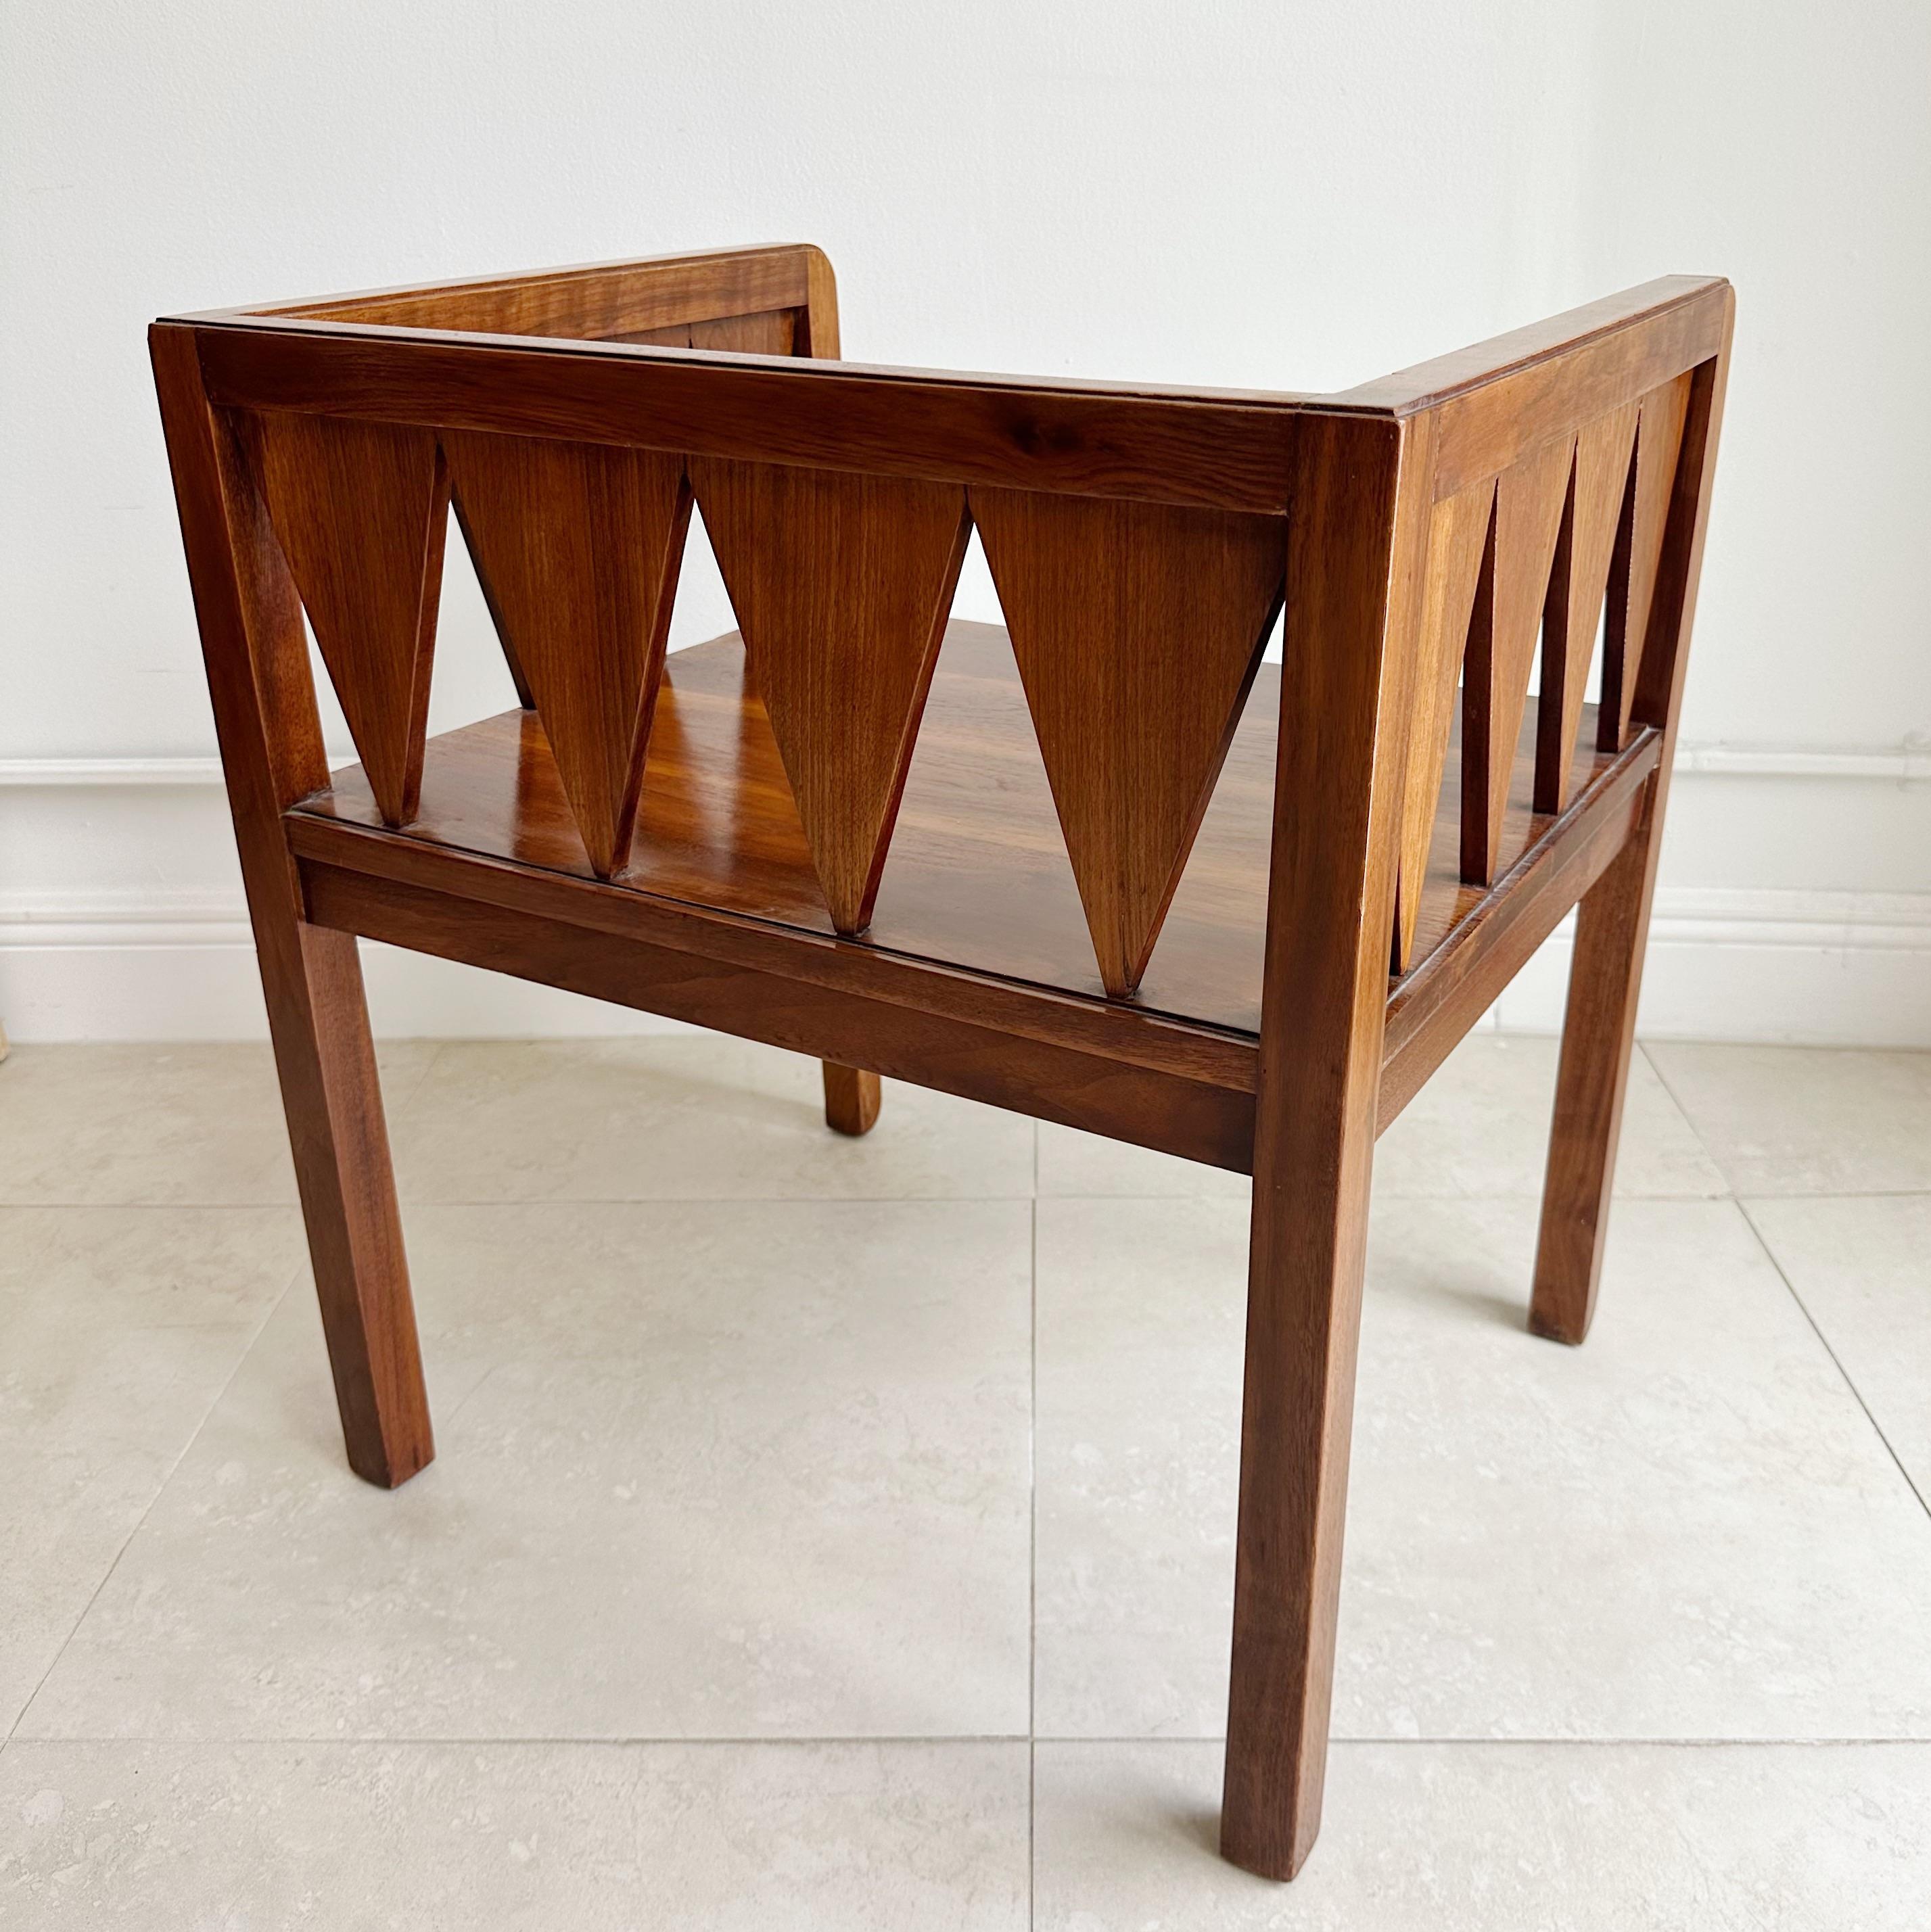 Hand-Crafted Important Paul Frankl Galleries Skyscraper Chair, circa 1927